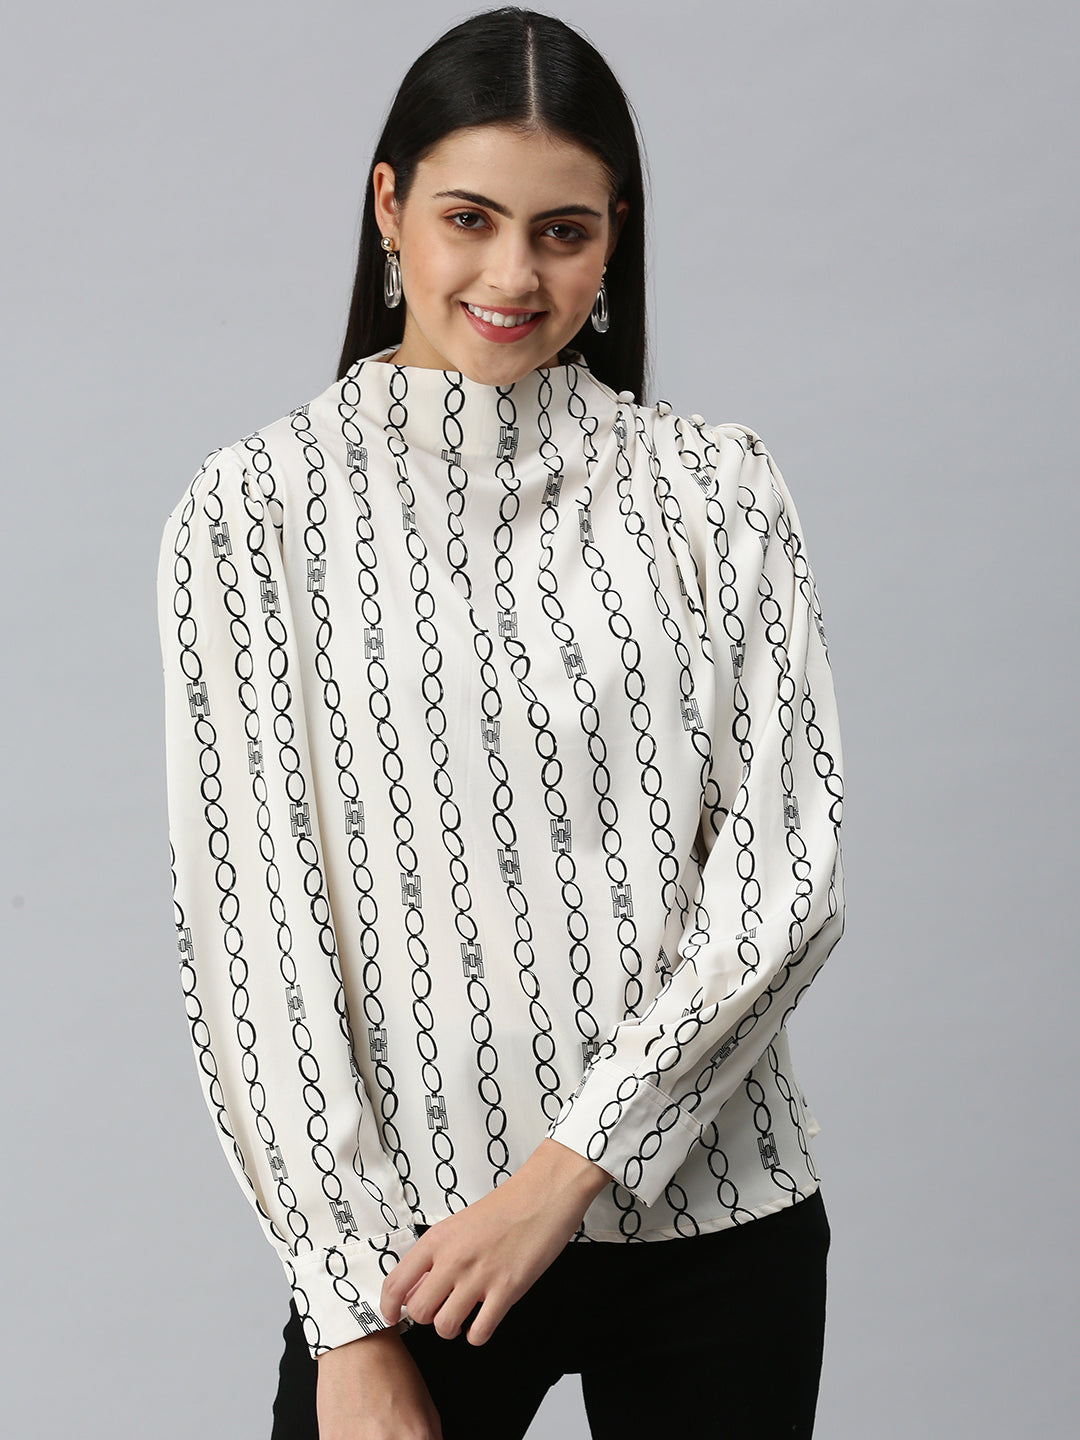 Women's Printed Off White Top